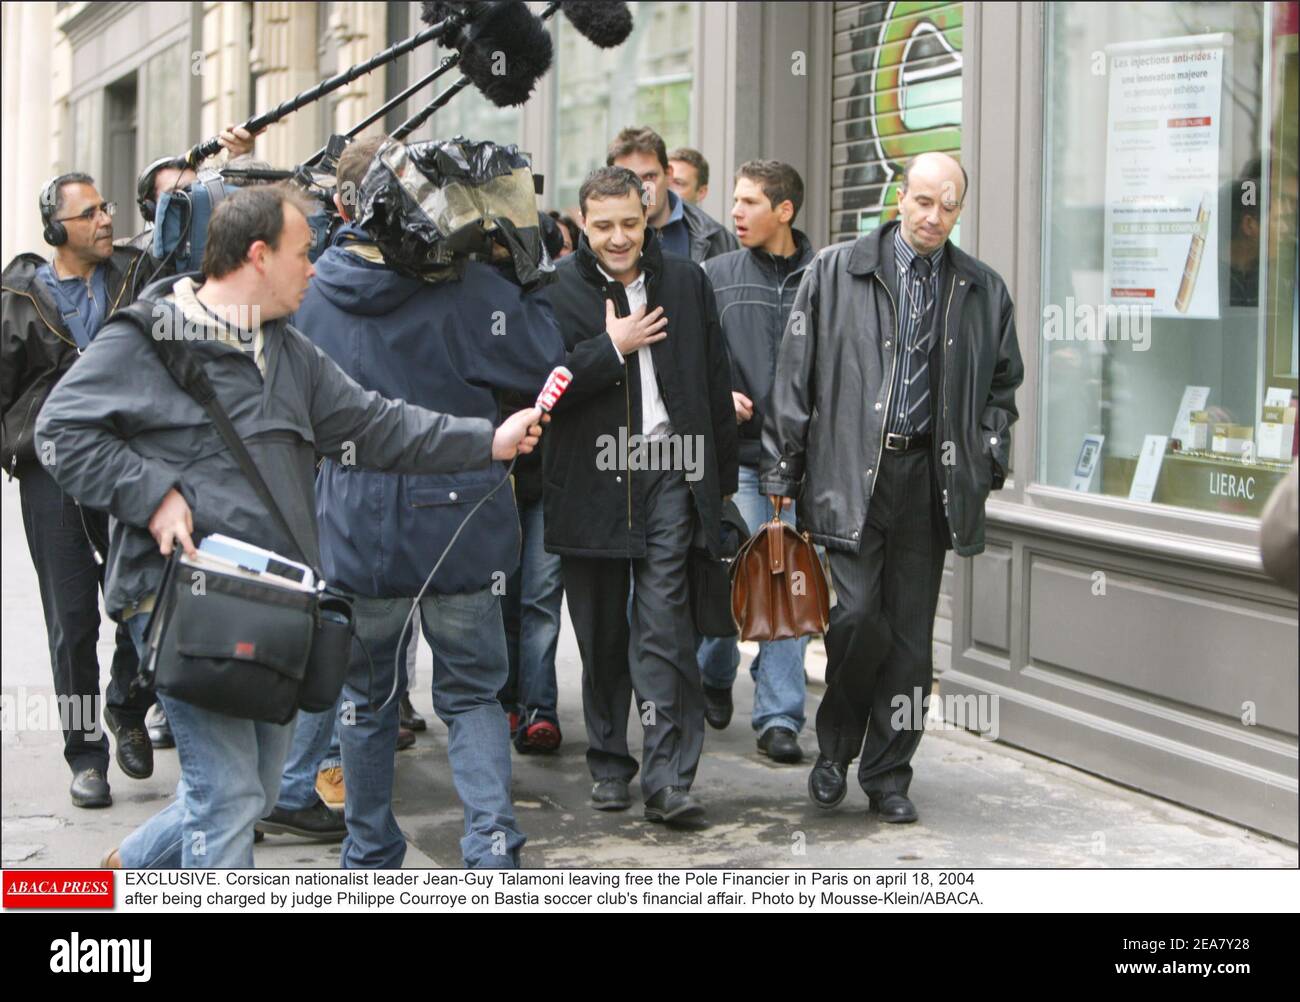 EXCLUSIVE. Corsican nationalist leader Jean-Guy Talamoni leaving free the Pole Financier in Paris on april 18, 2004 after being charged by judge Philippe Courroye on Bastia soccer club's financial affair. Photo by Mousse-Klein/ABACA. Stock Photo